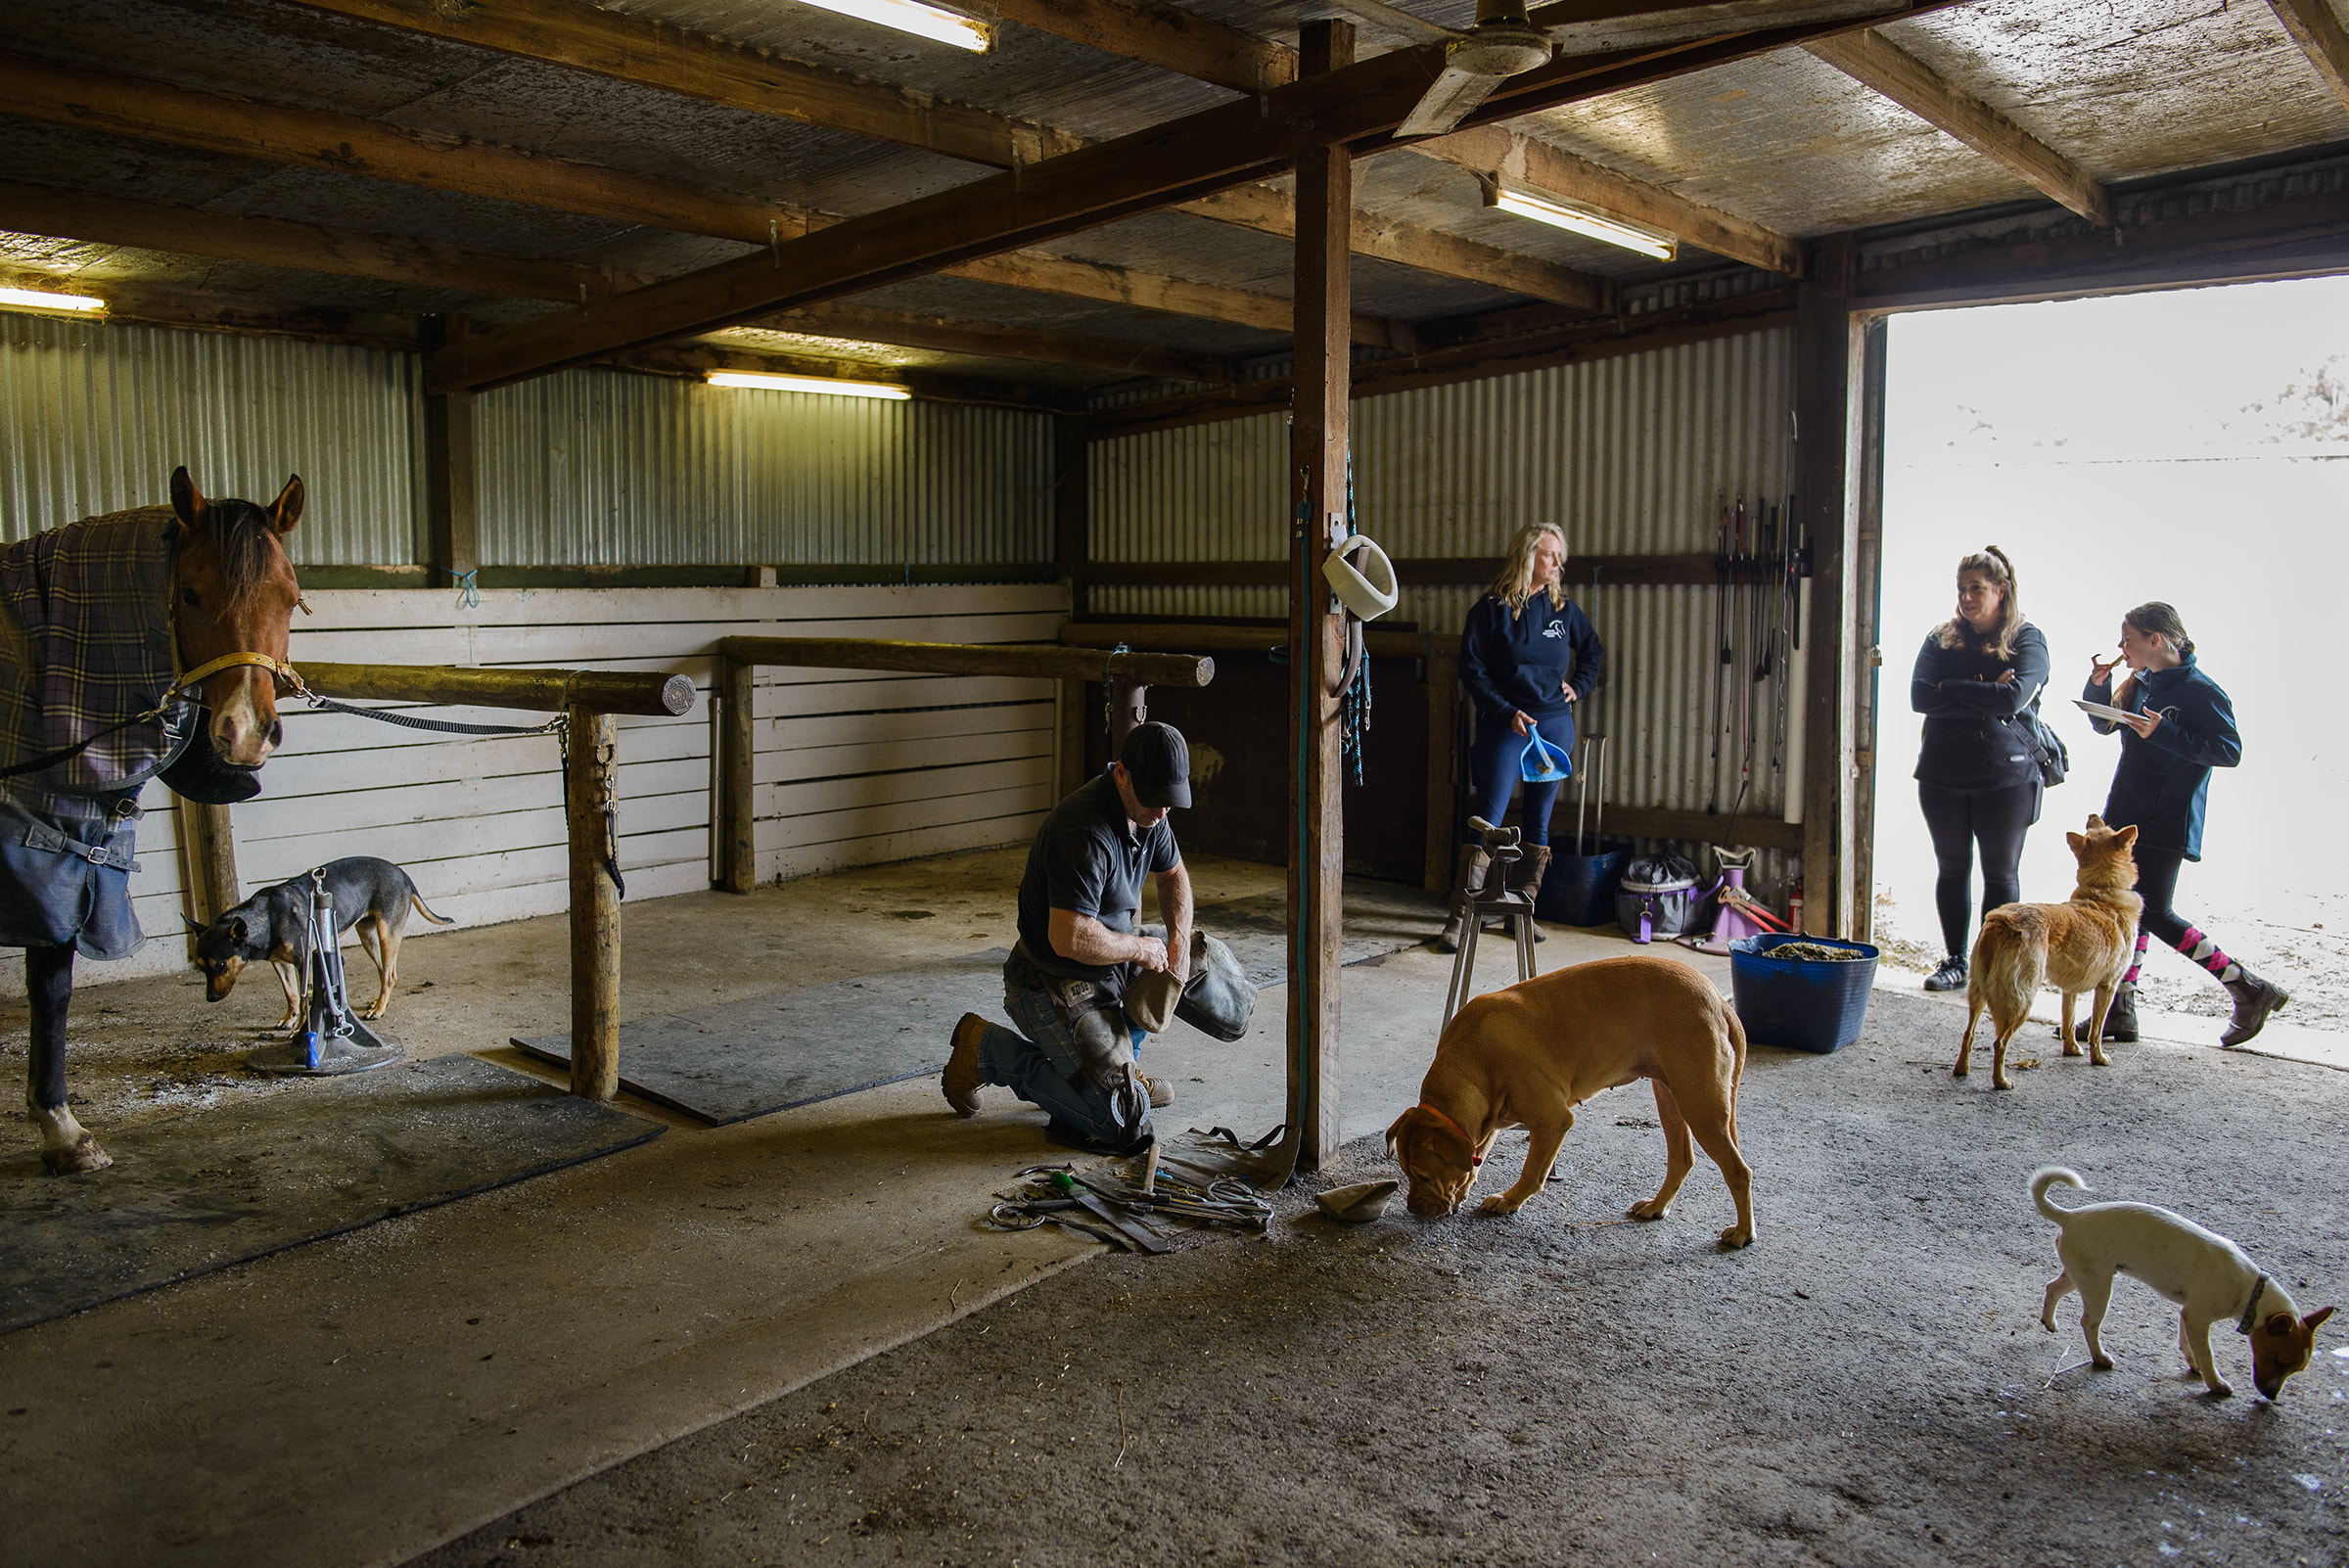 A scene at Rivally Equestrian Services, local farrier Dean, works on a horse with a trainer, parent & student observing.